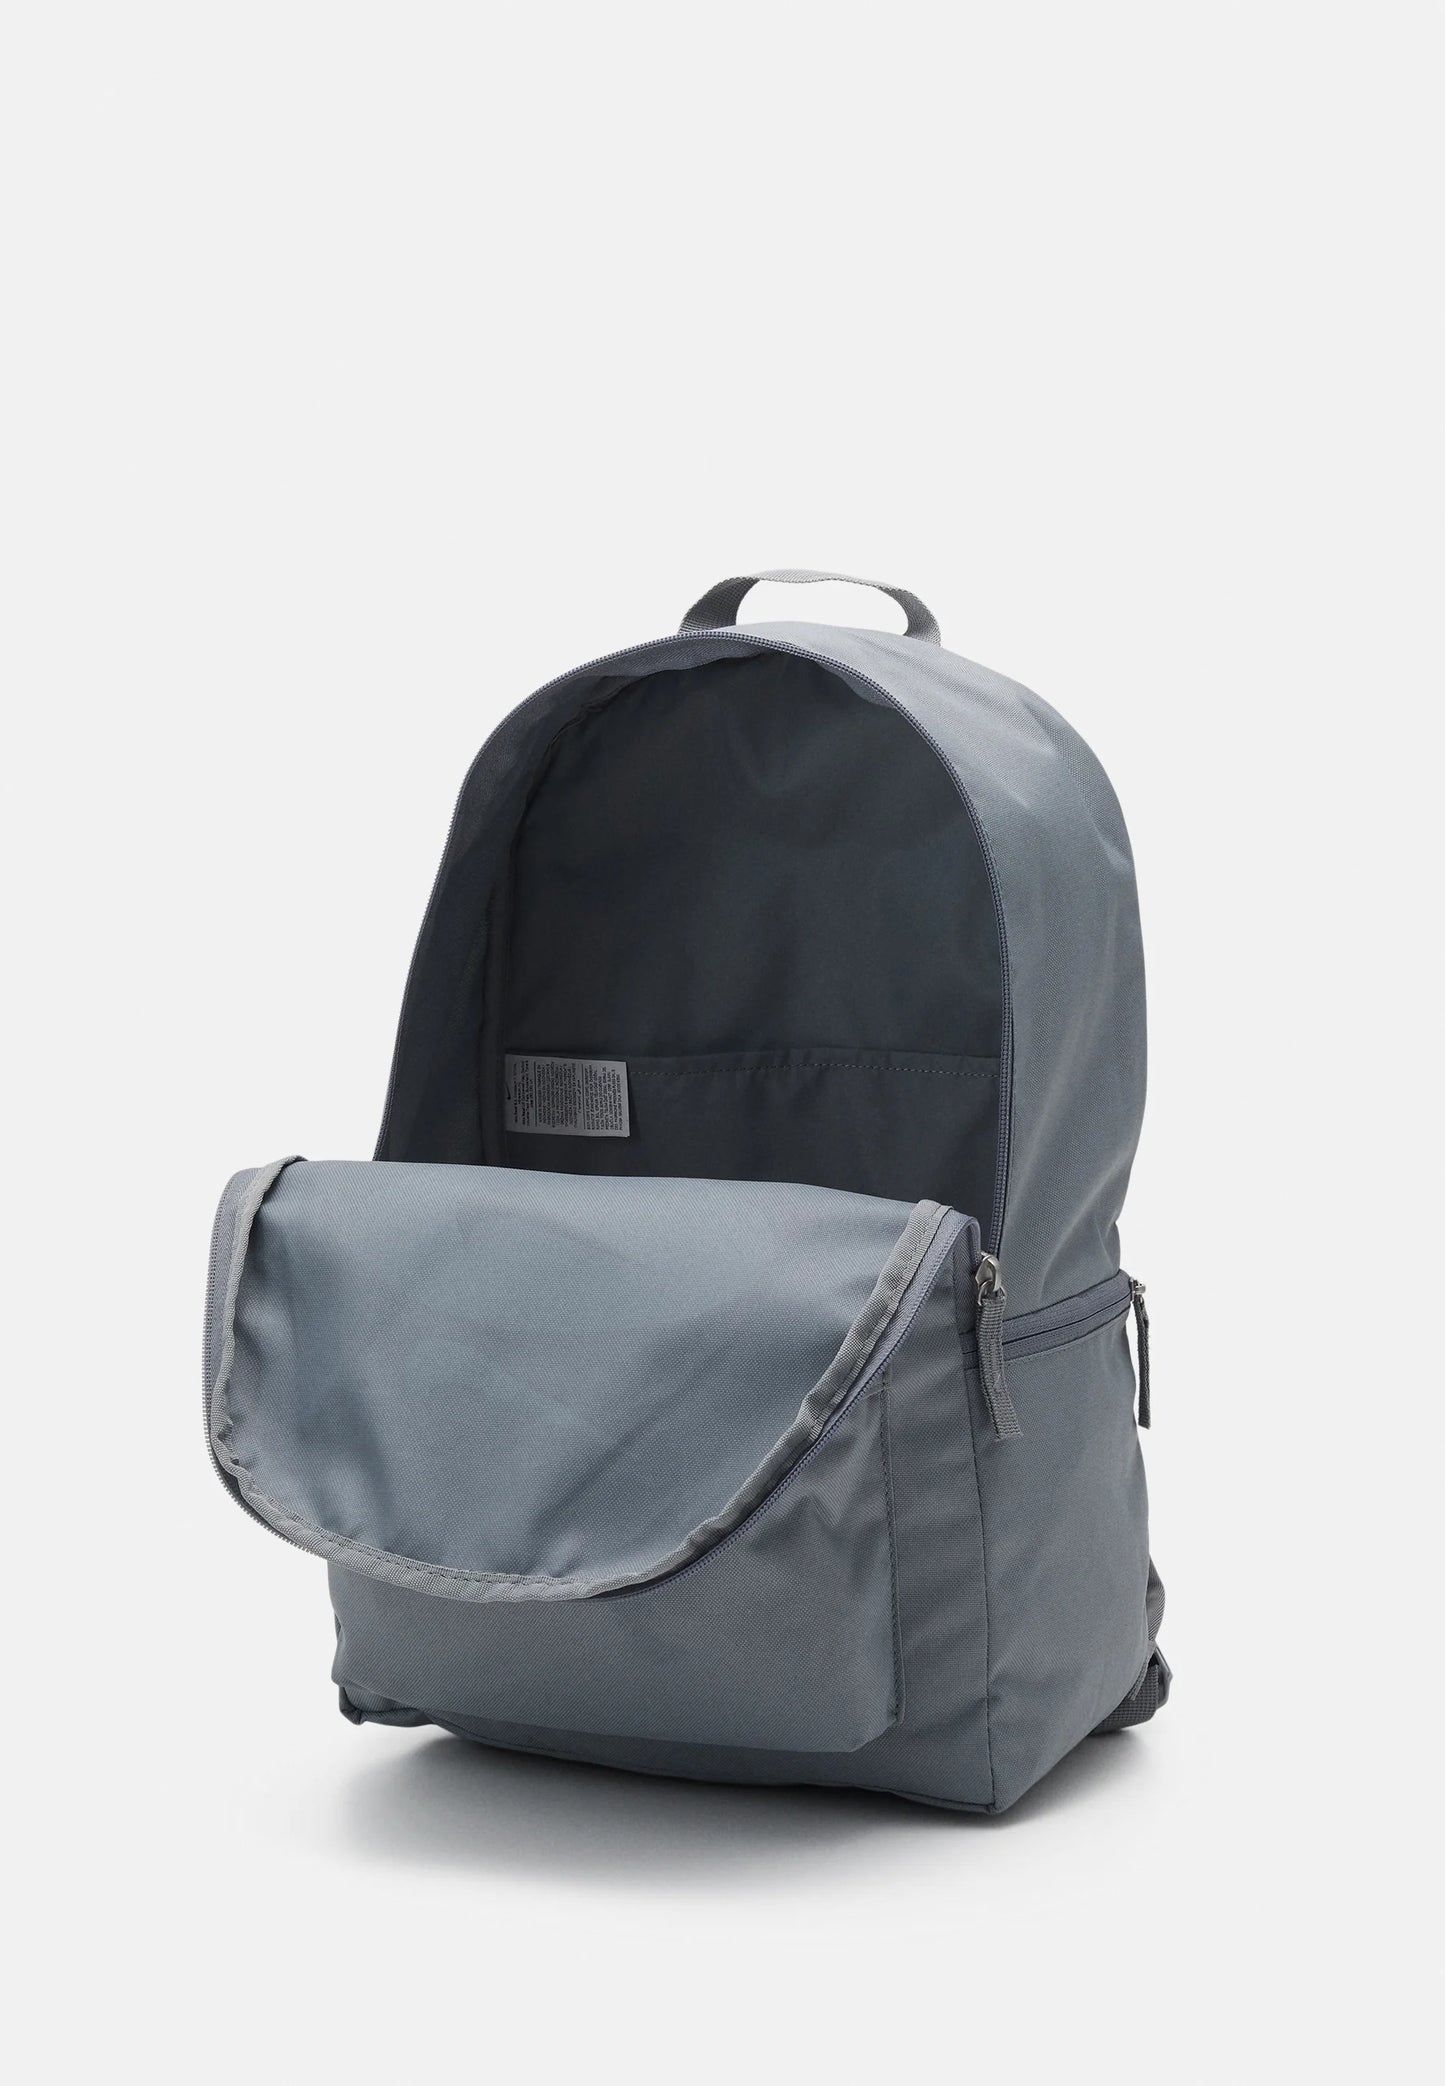 Nike Heritage backpack in particle gray